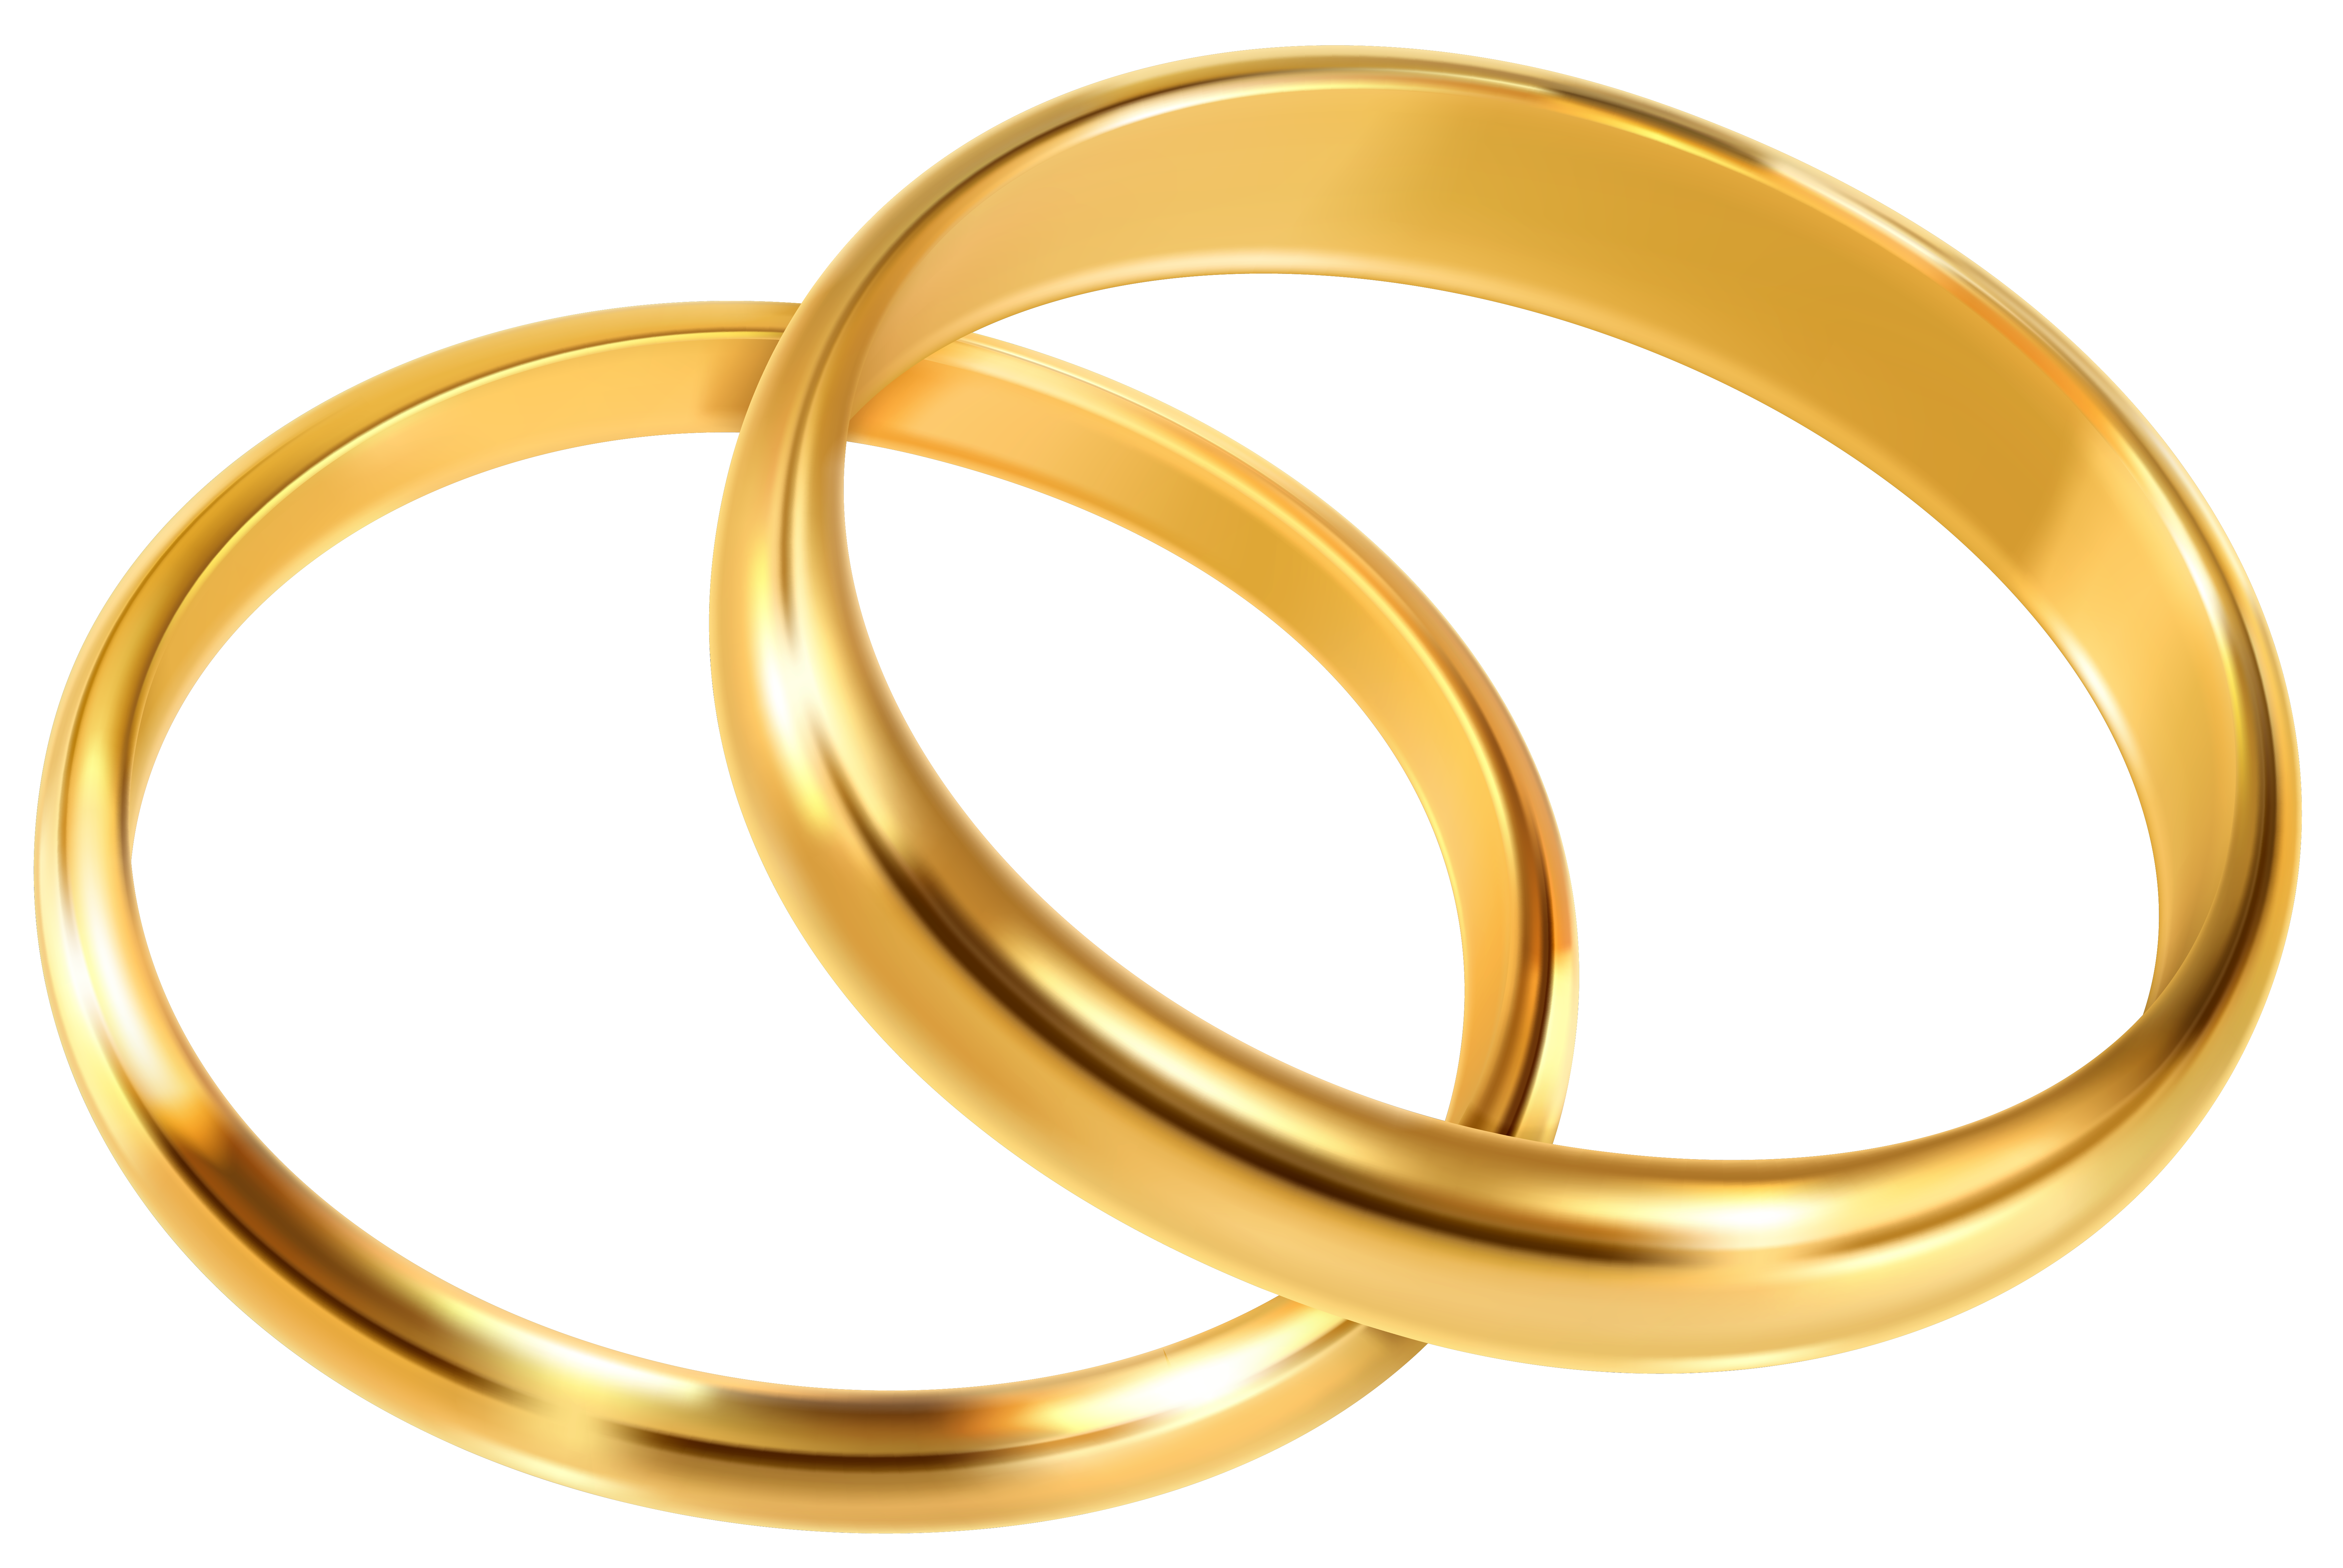 Wedding Rings PNG Clip Art Image | Gallery Yopriceville - High-Quality